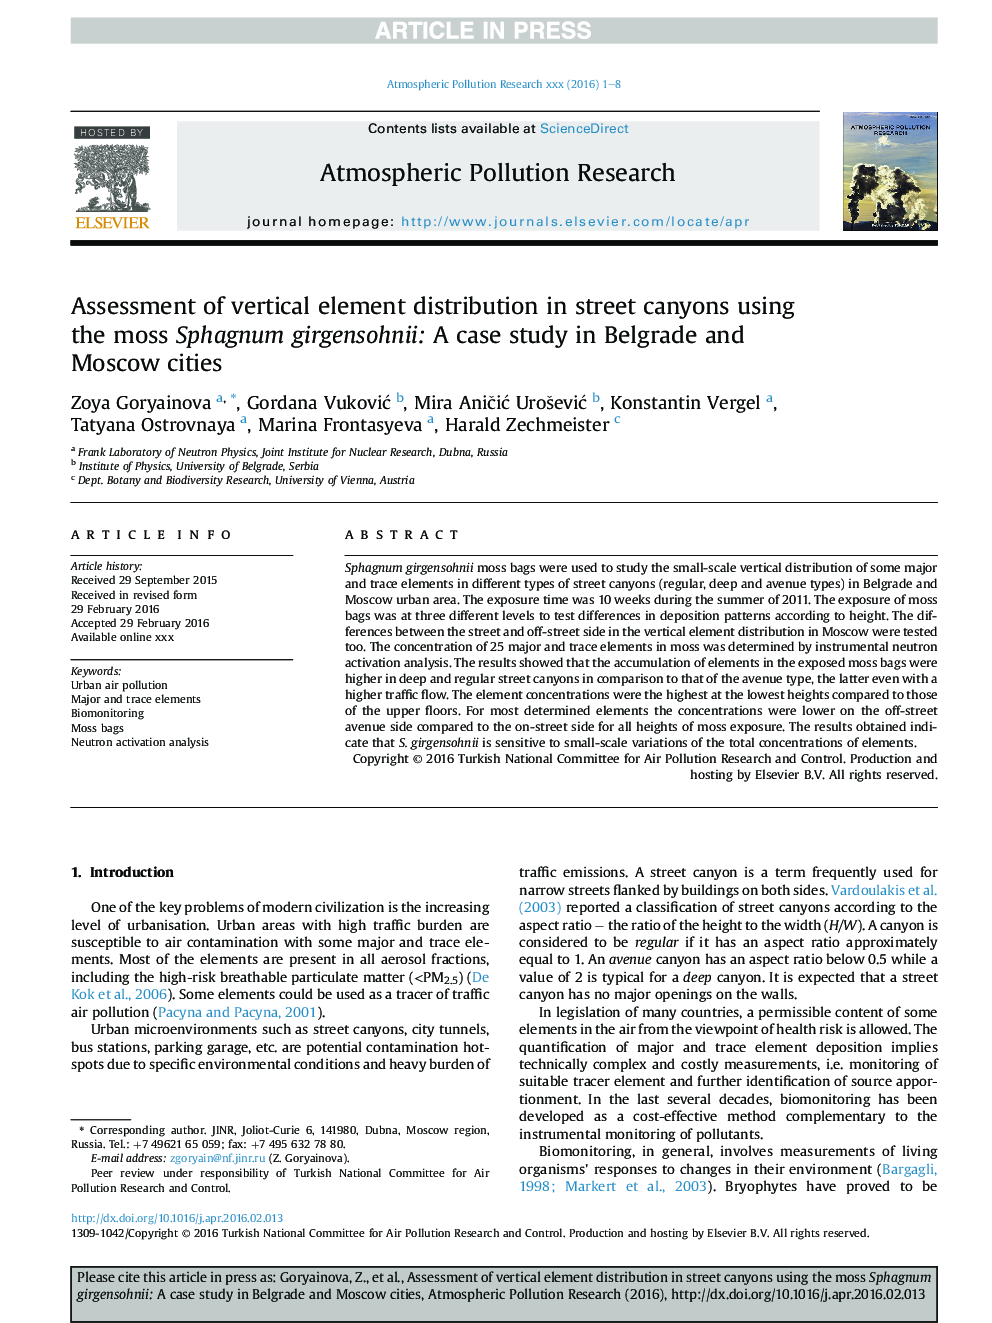 Assessment of vertical element distribution in street canyons using the moss Sphagnum girgensohnii: A case study in Belgrade and Moscow cities